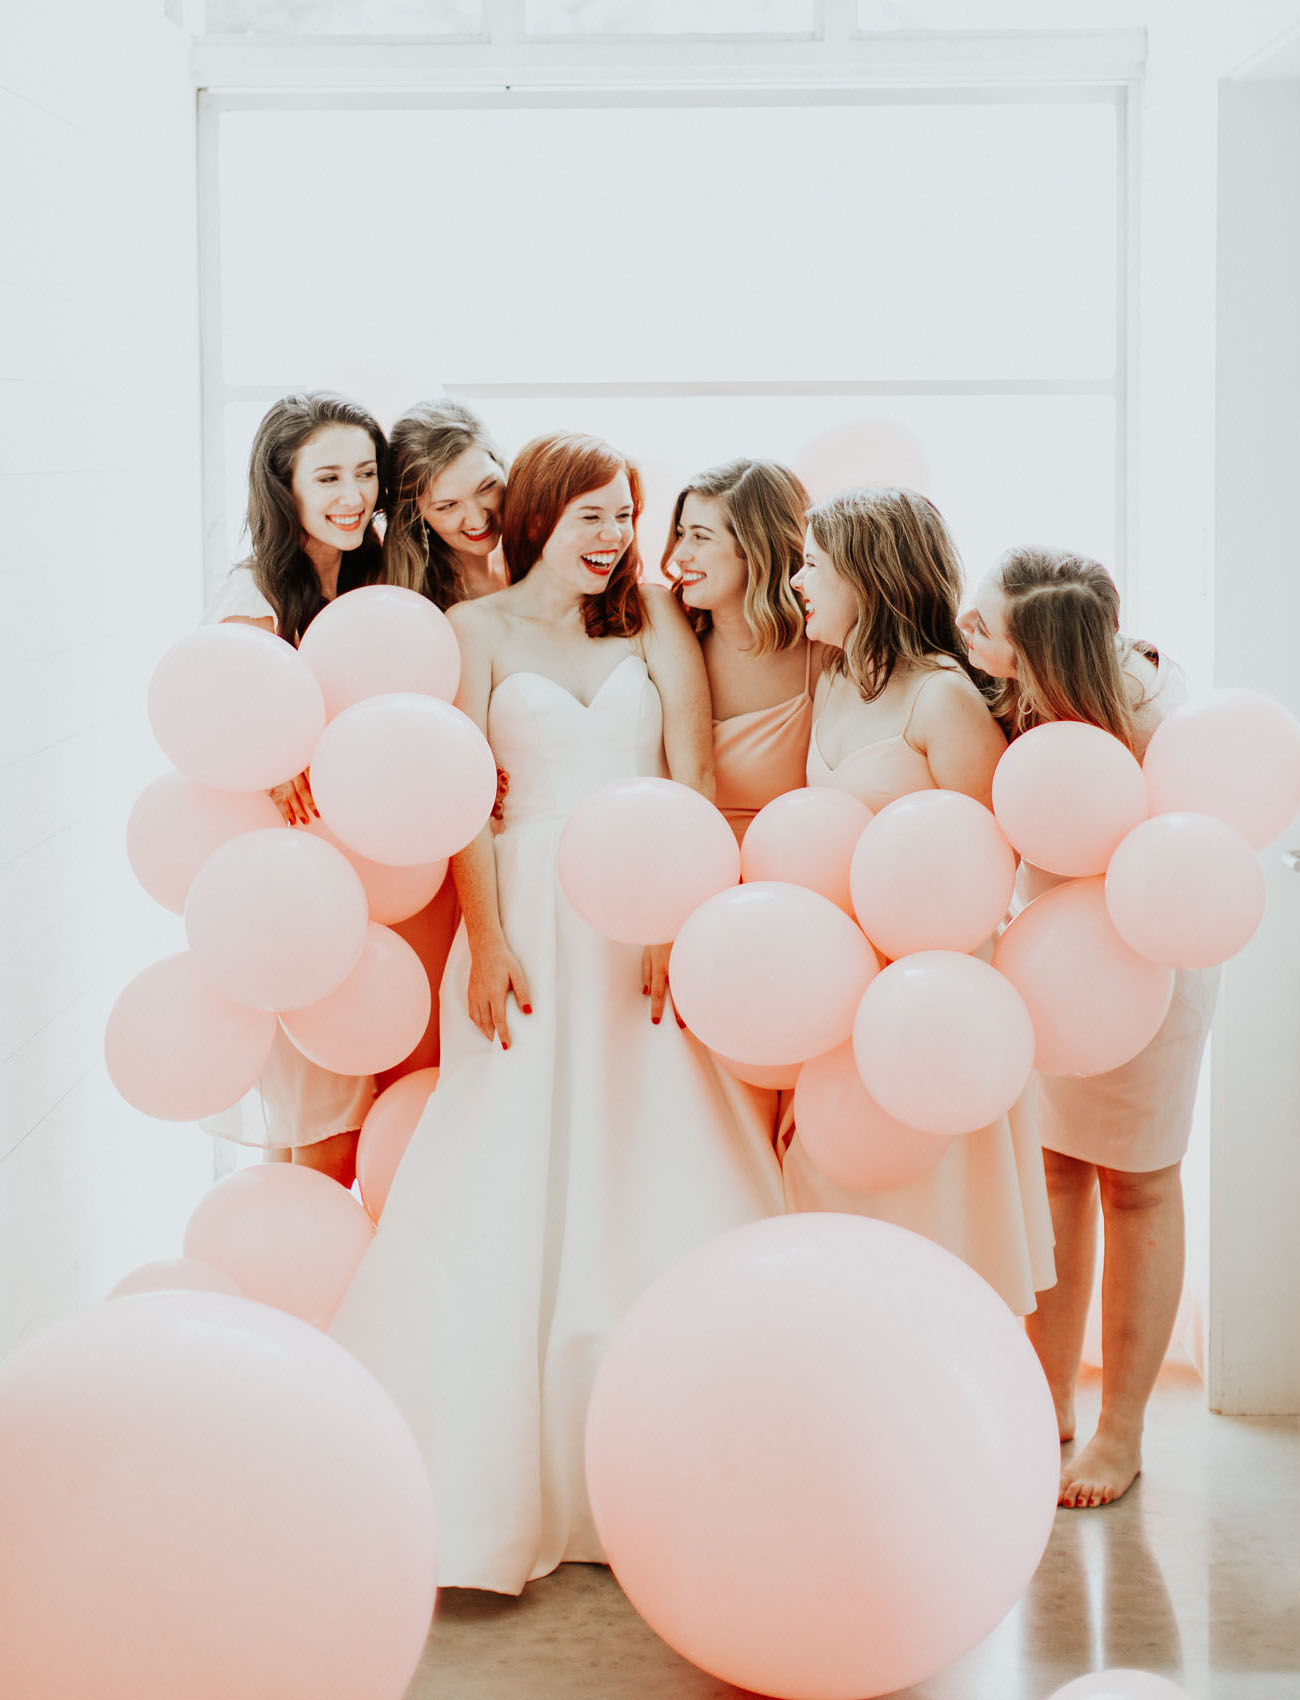 This gorgeous wedding was fun, party styled and with touches of peachy pink and red